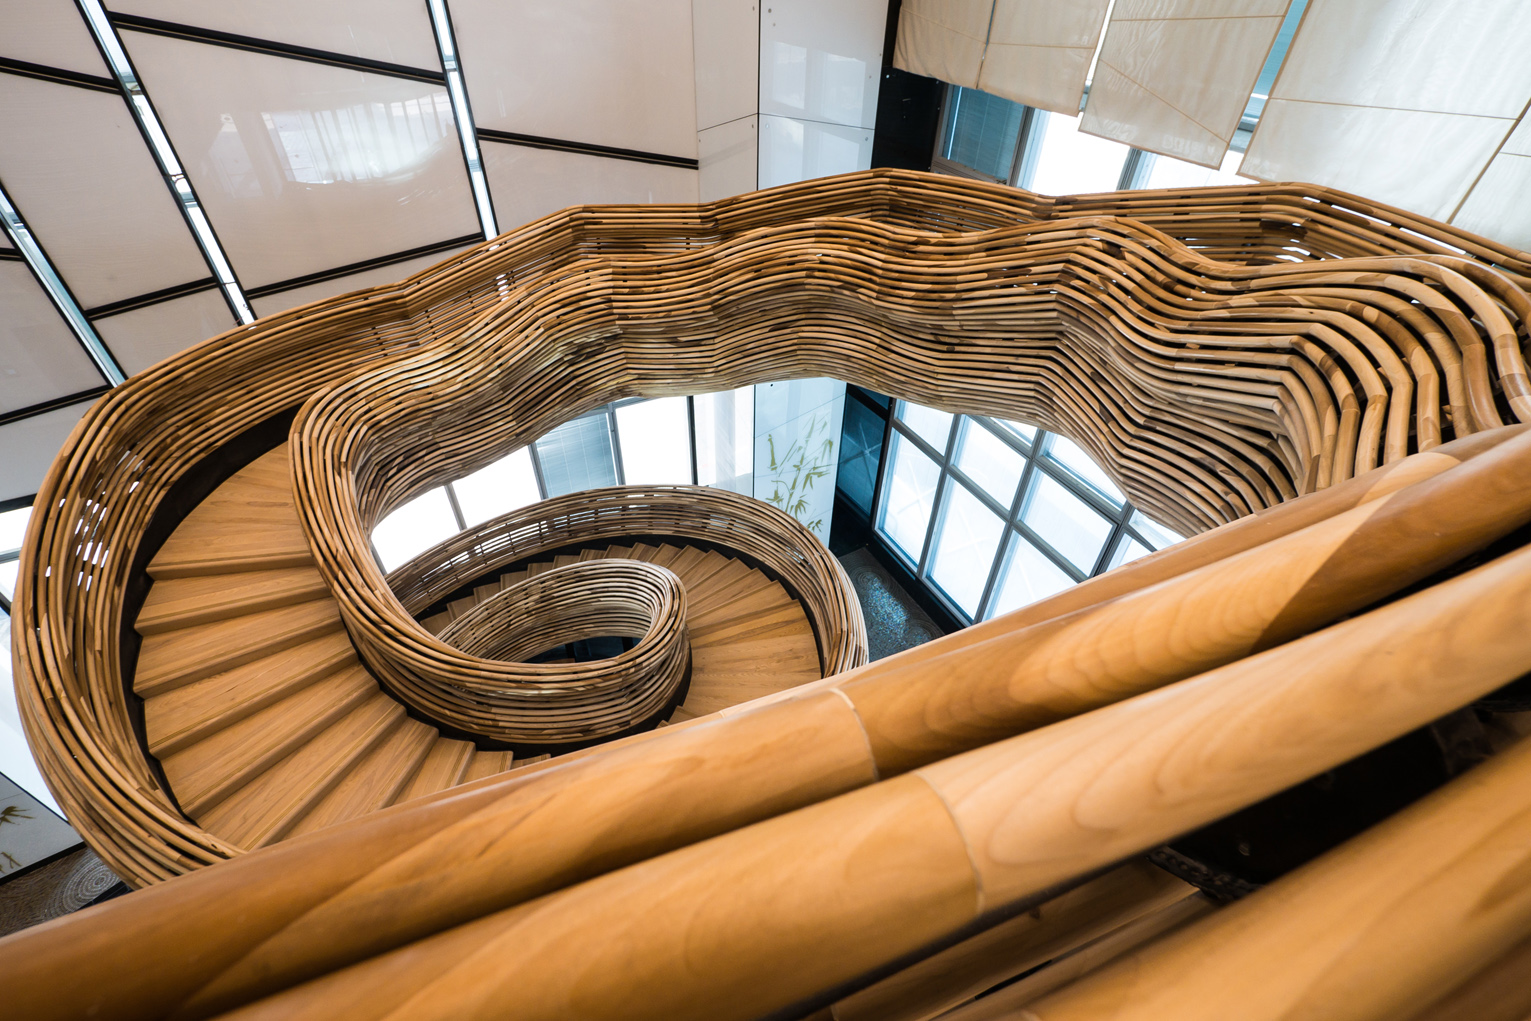 The railings are constructed of 9,000 meters of raw Poplar wood, cut in a CNC machine to form a series of arches then assembled in situ. Each piece was completed with a reverse radius to create a continuous wave to achieve a seamless transition.